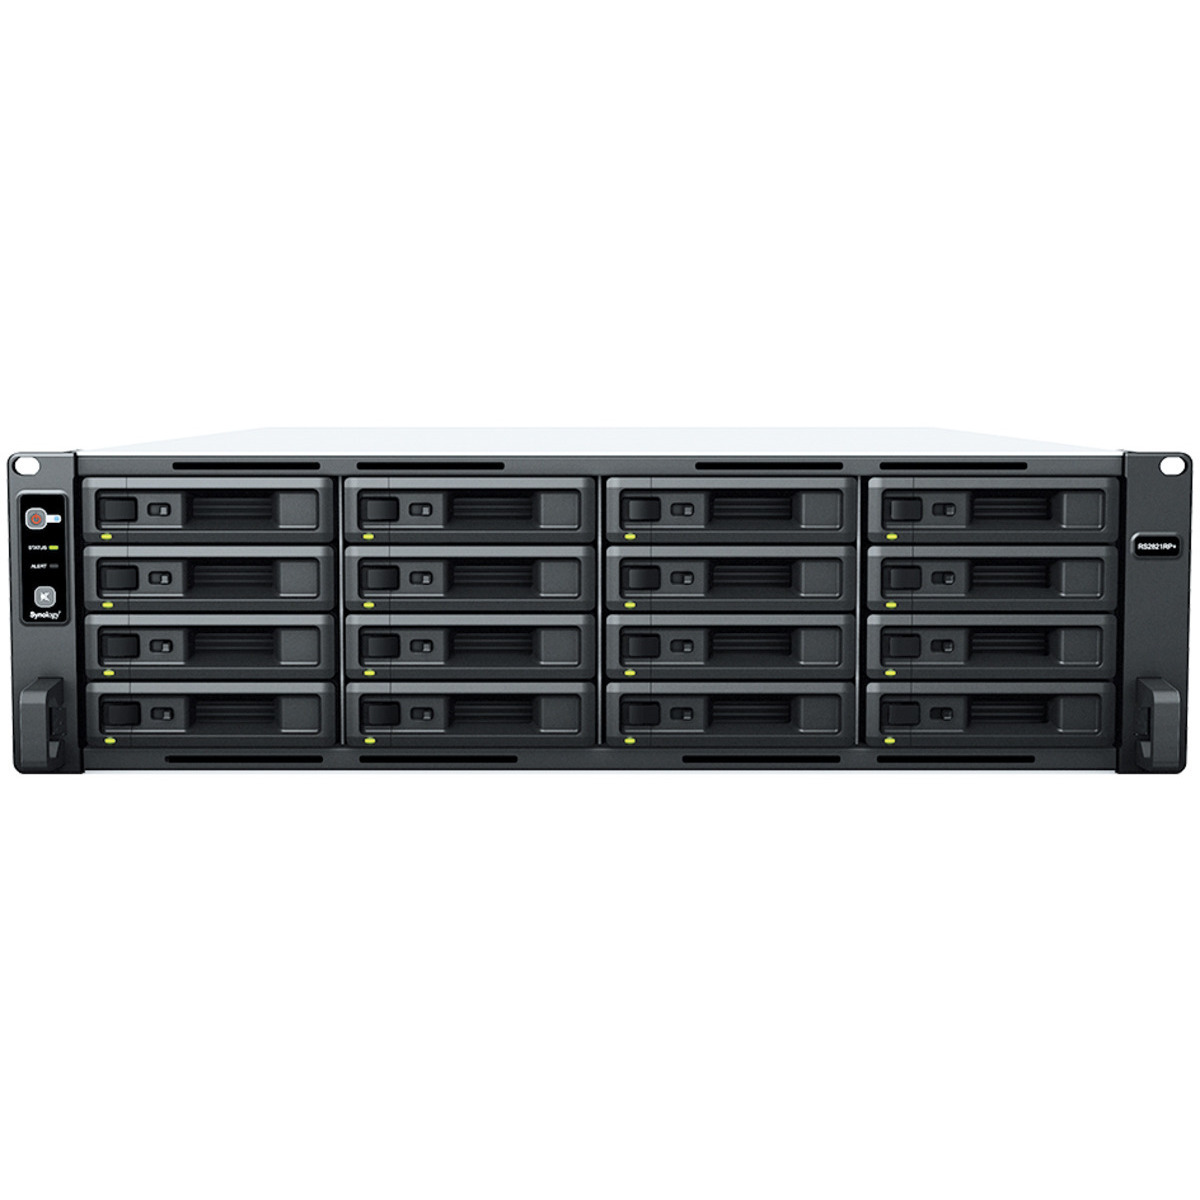 buy $18579 Synology RackStation RS2821RP+ 128tb RackMount NAS - Network Attached Storage Device 16x8000gb Samsung 870 QVO MZ-77Q8T0 2.5 SATA 6Gb/s SSD CONSUMER Class Drives Installed - Burn-In Tested - nas headquarters buy network attached storage server device das new raid-5 free shipping usa christmas new year holiday sale RackStation RS2821RP+